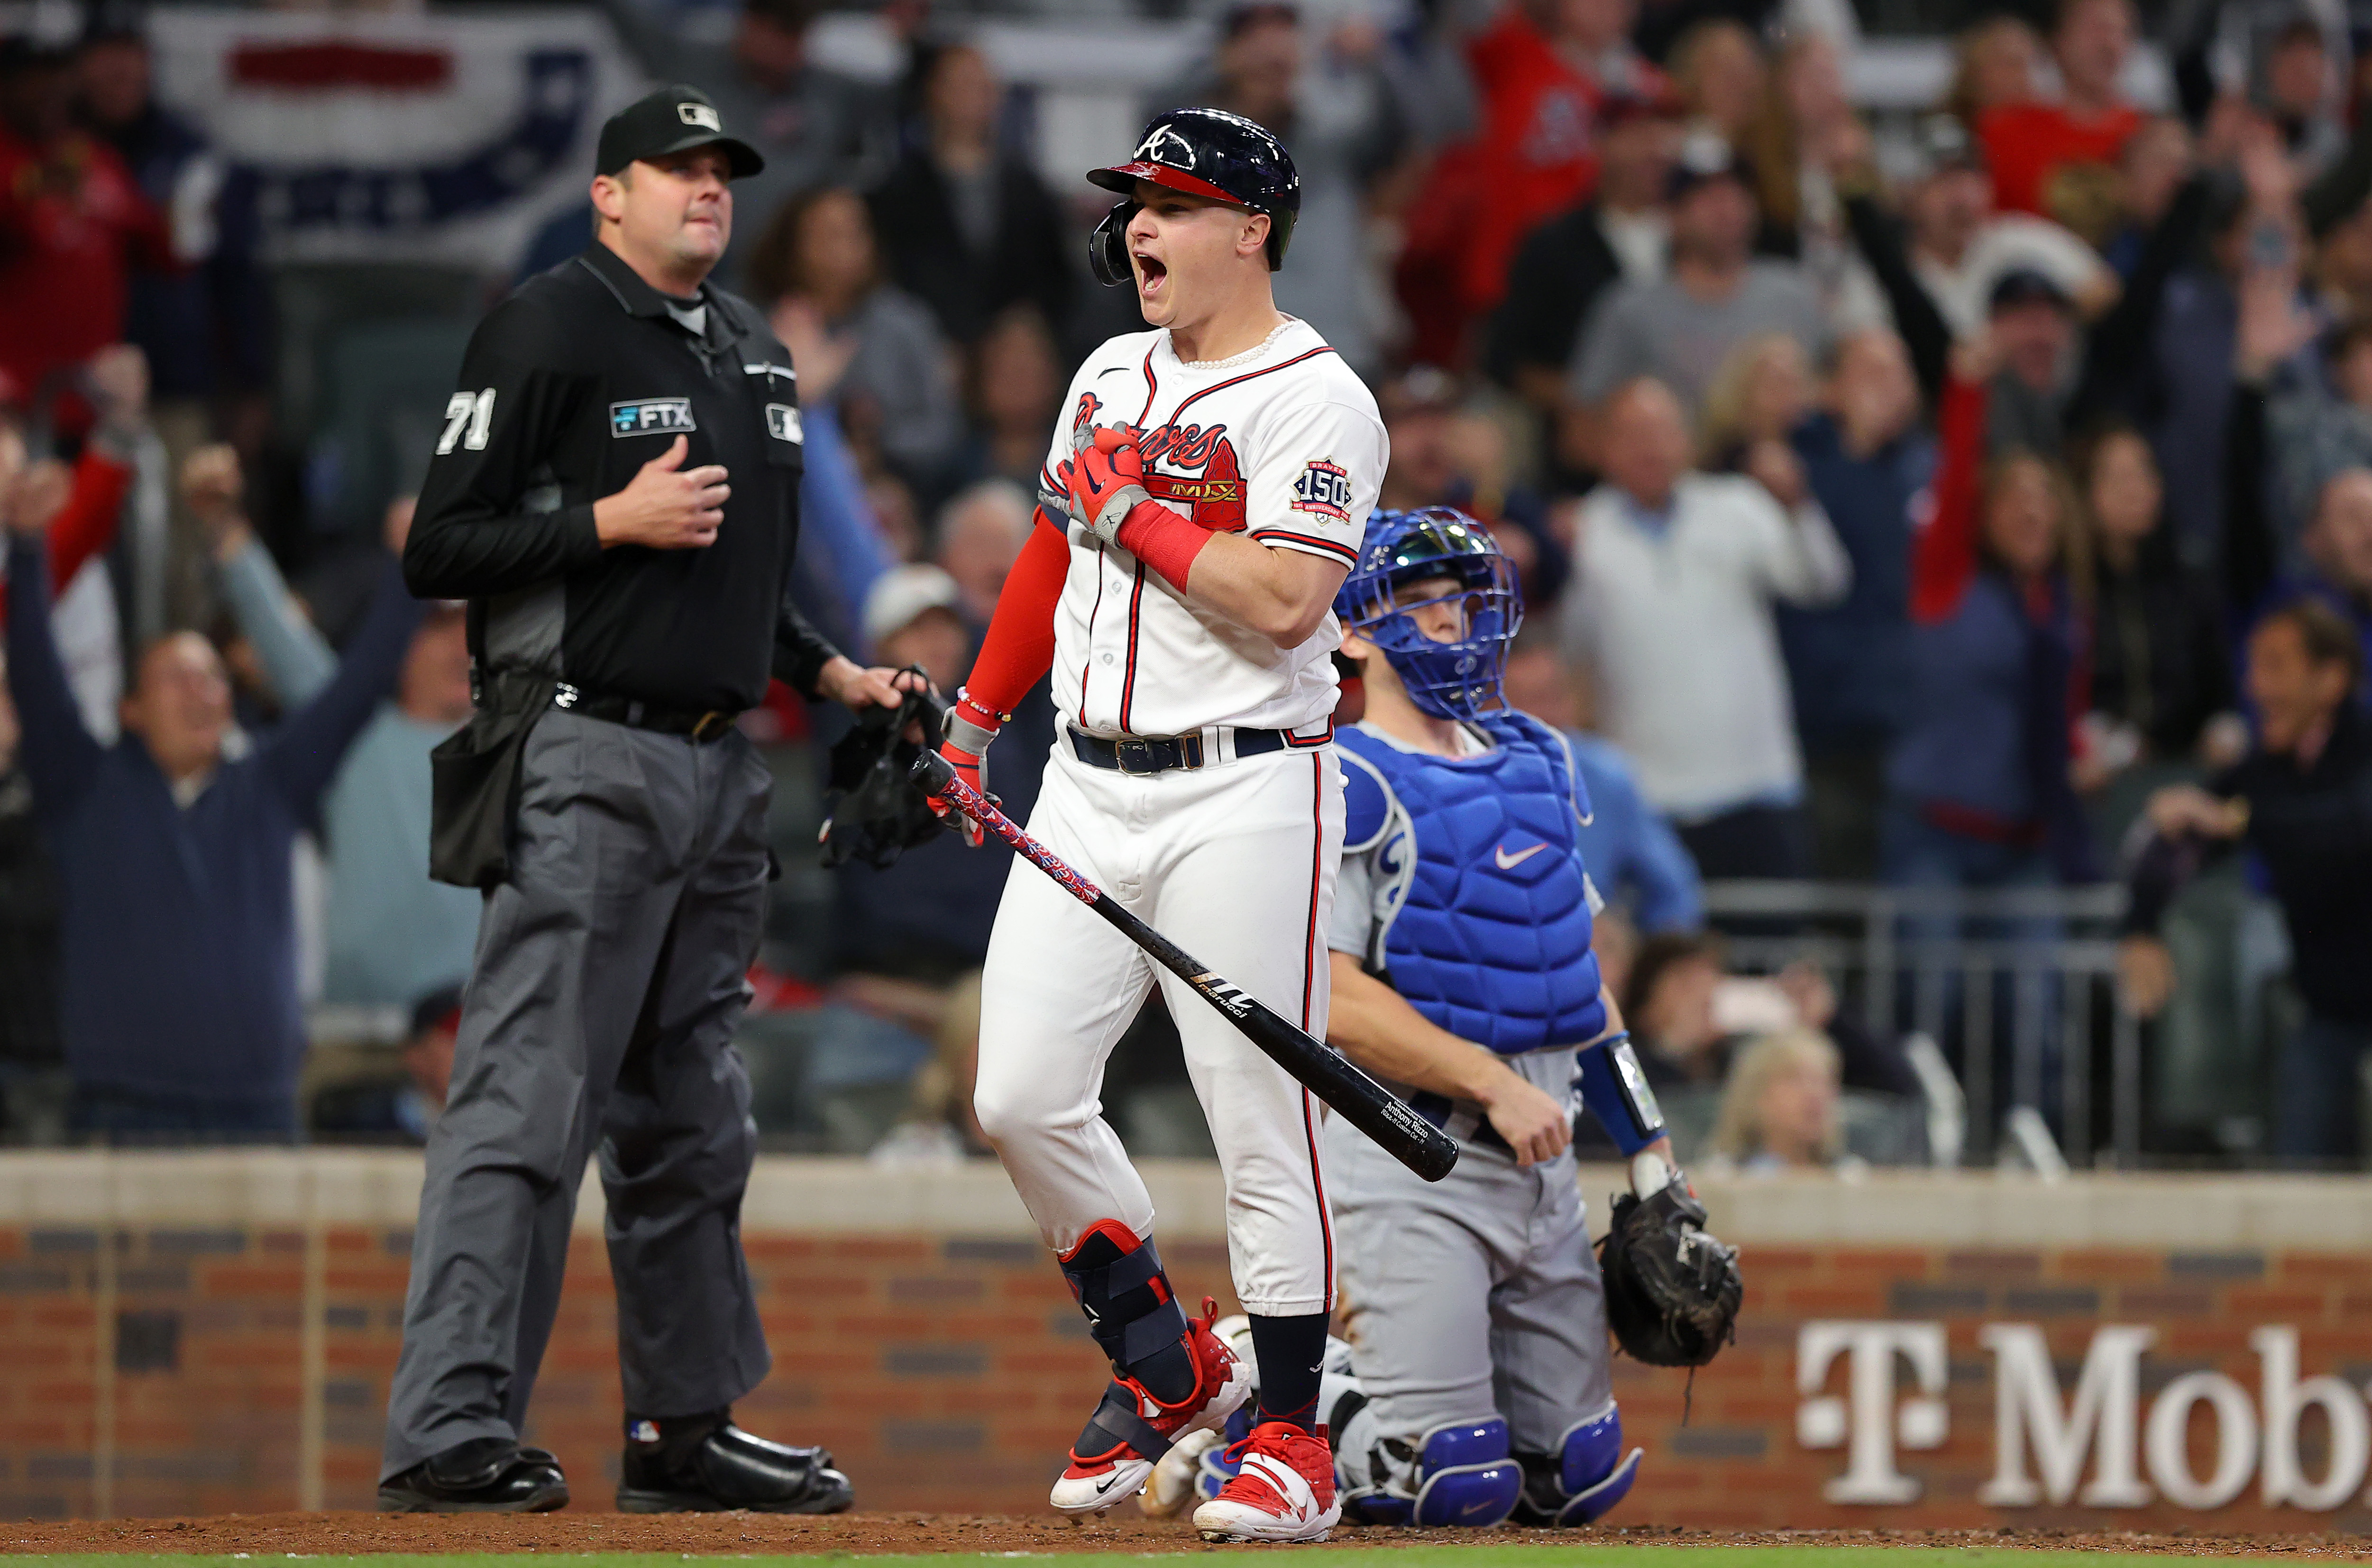 Why Are the Braves Wearing Pearls in 2021 World Series? – NBC